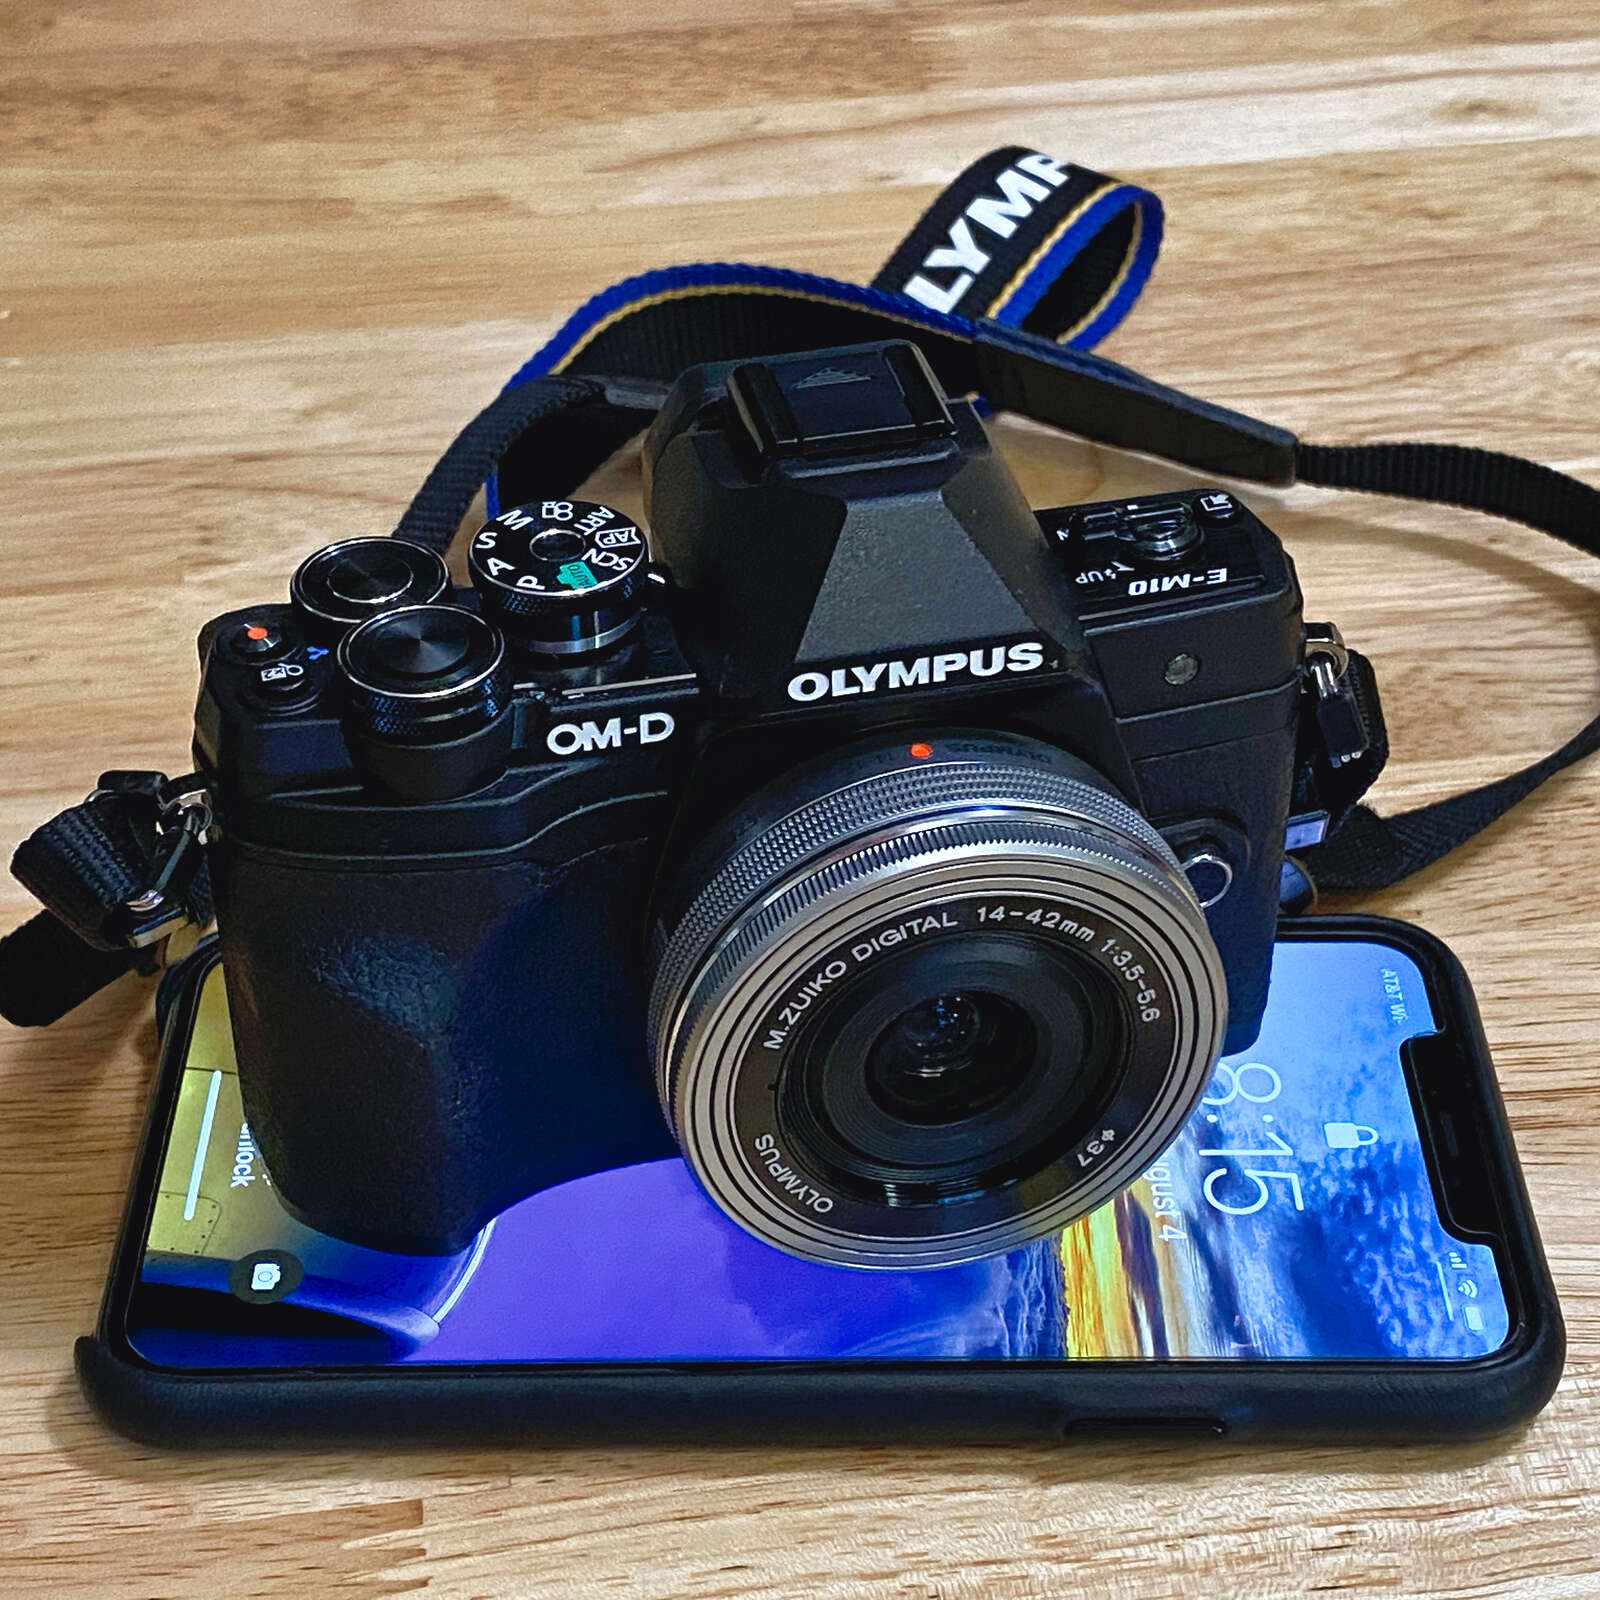 Taking Travel Photos With The New Olympus OM-D E-M10 Mark IV 